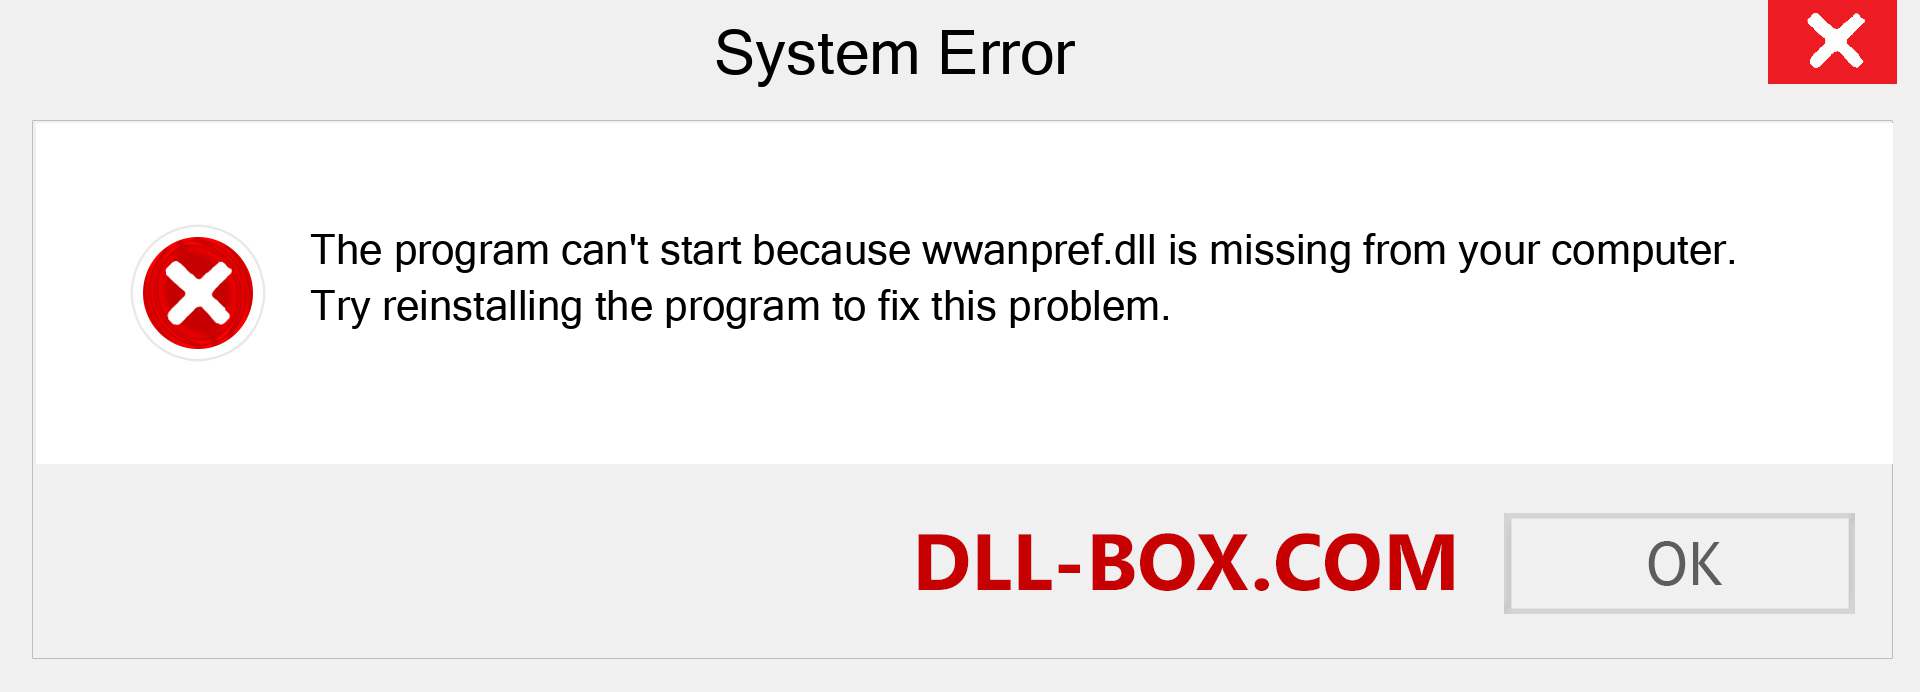  wwanpref.dll file is missing?. Download for Windows 7, 8, 10 - Fix  wwanpref dll Missing Error on Windows, photos, images